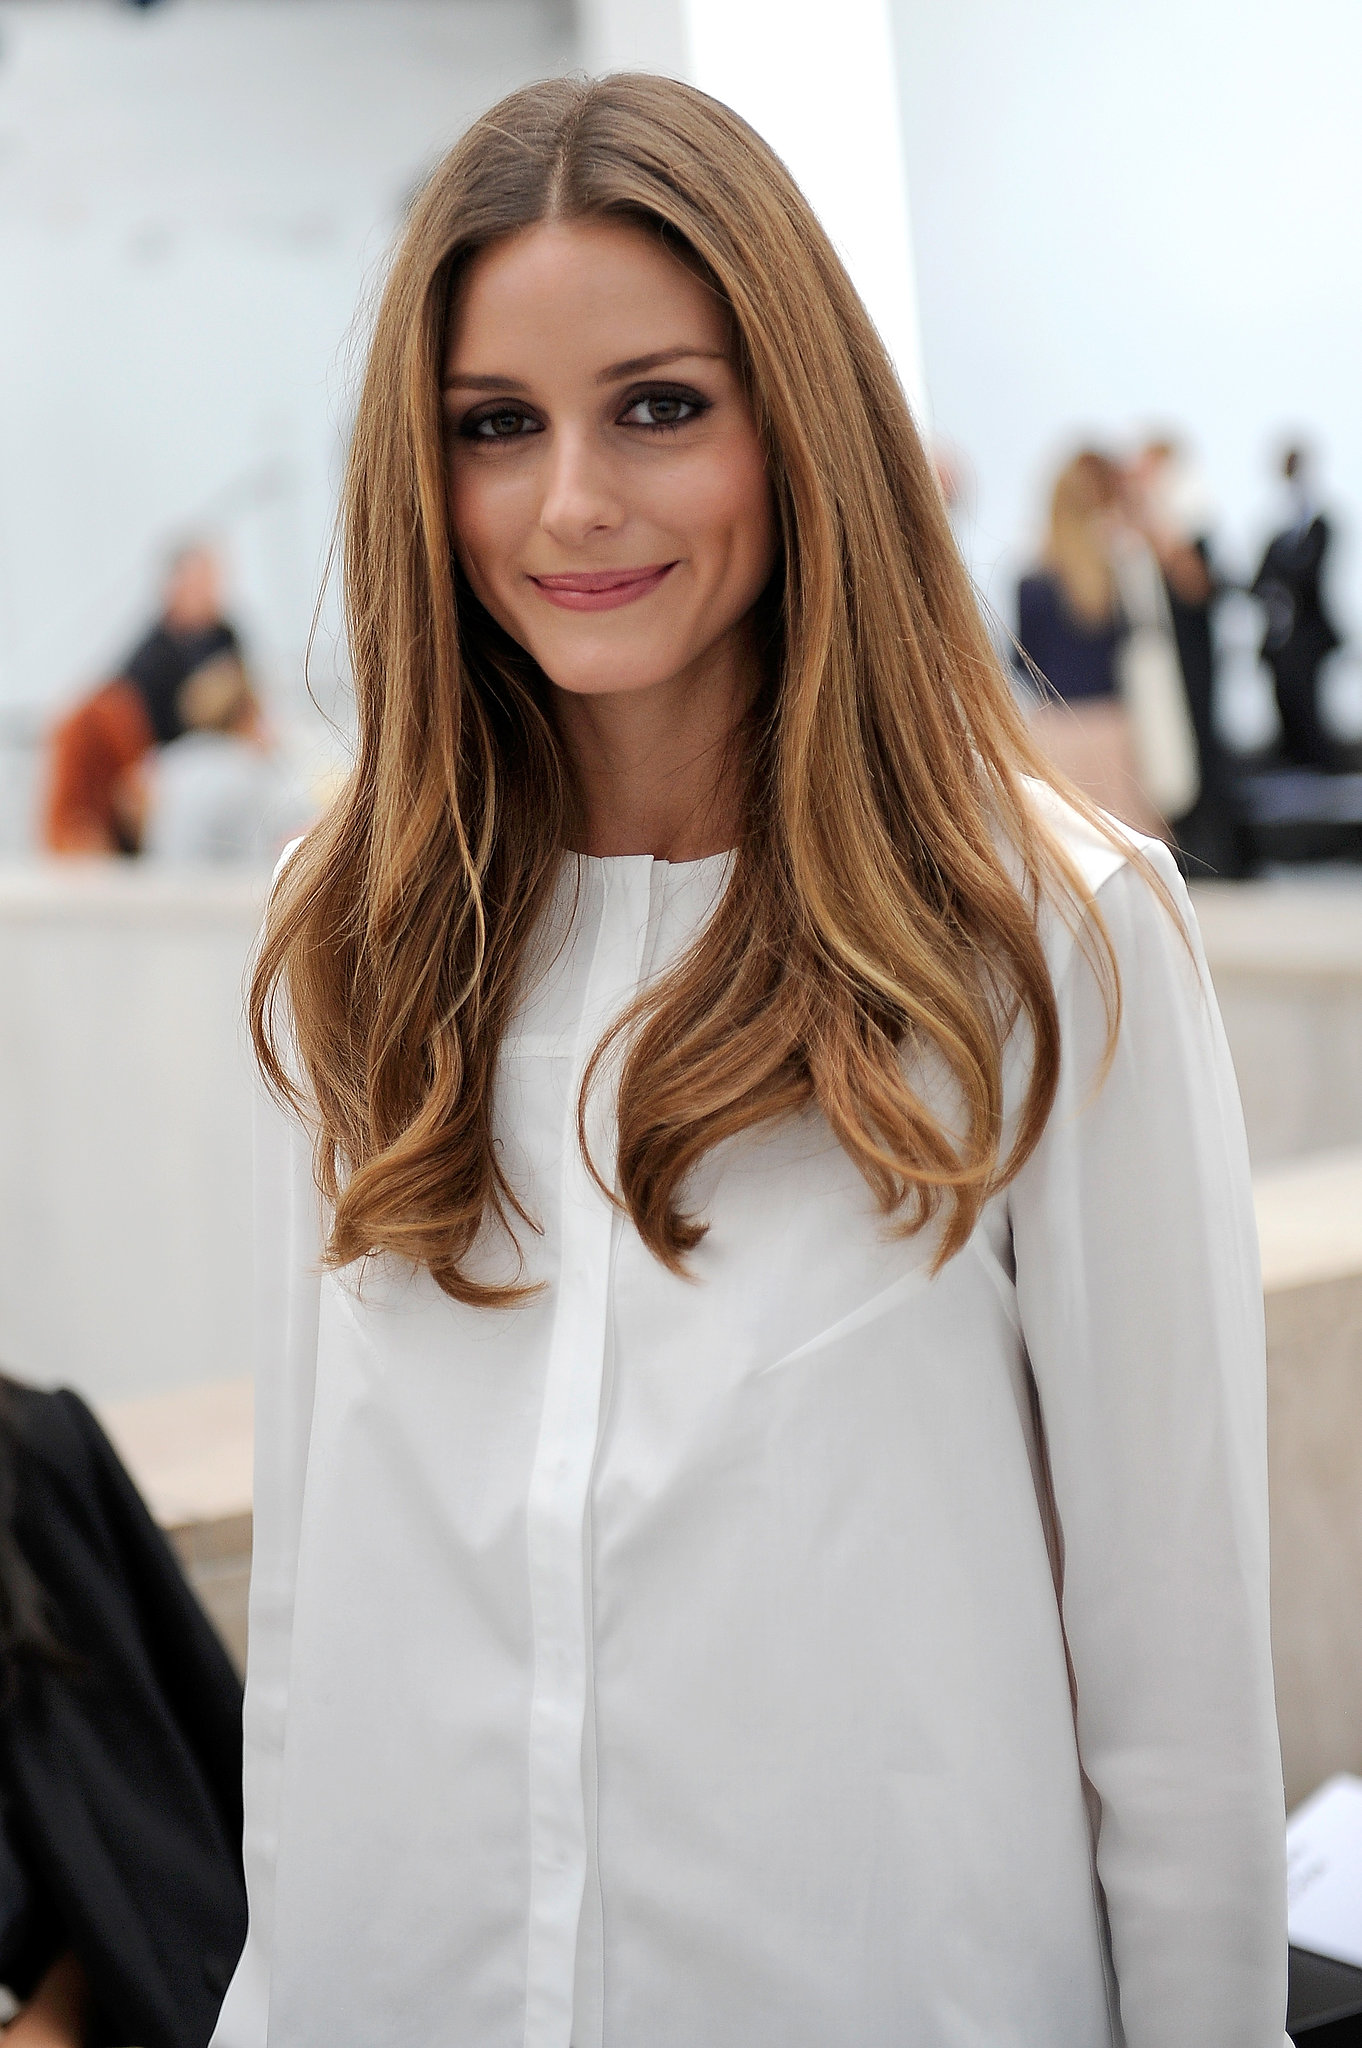 25 All Time Best Pictures of Olivia Palermo Style and Fashion